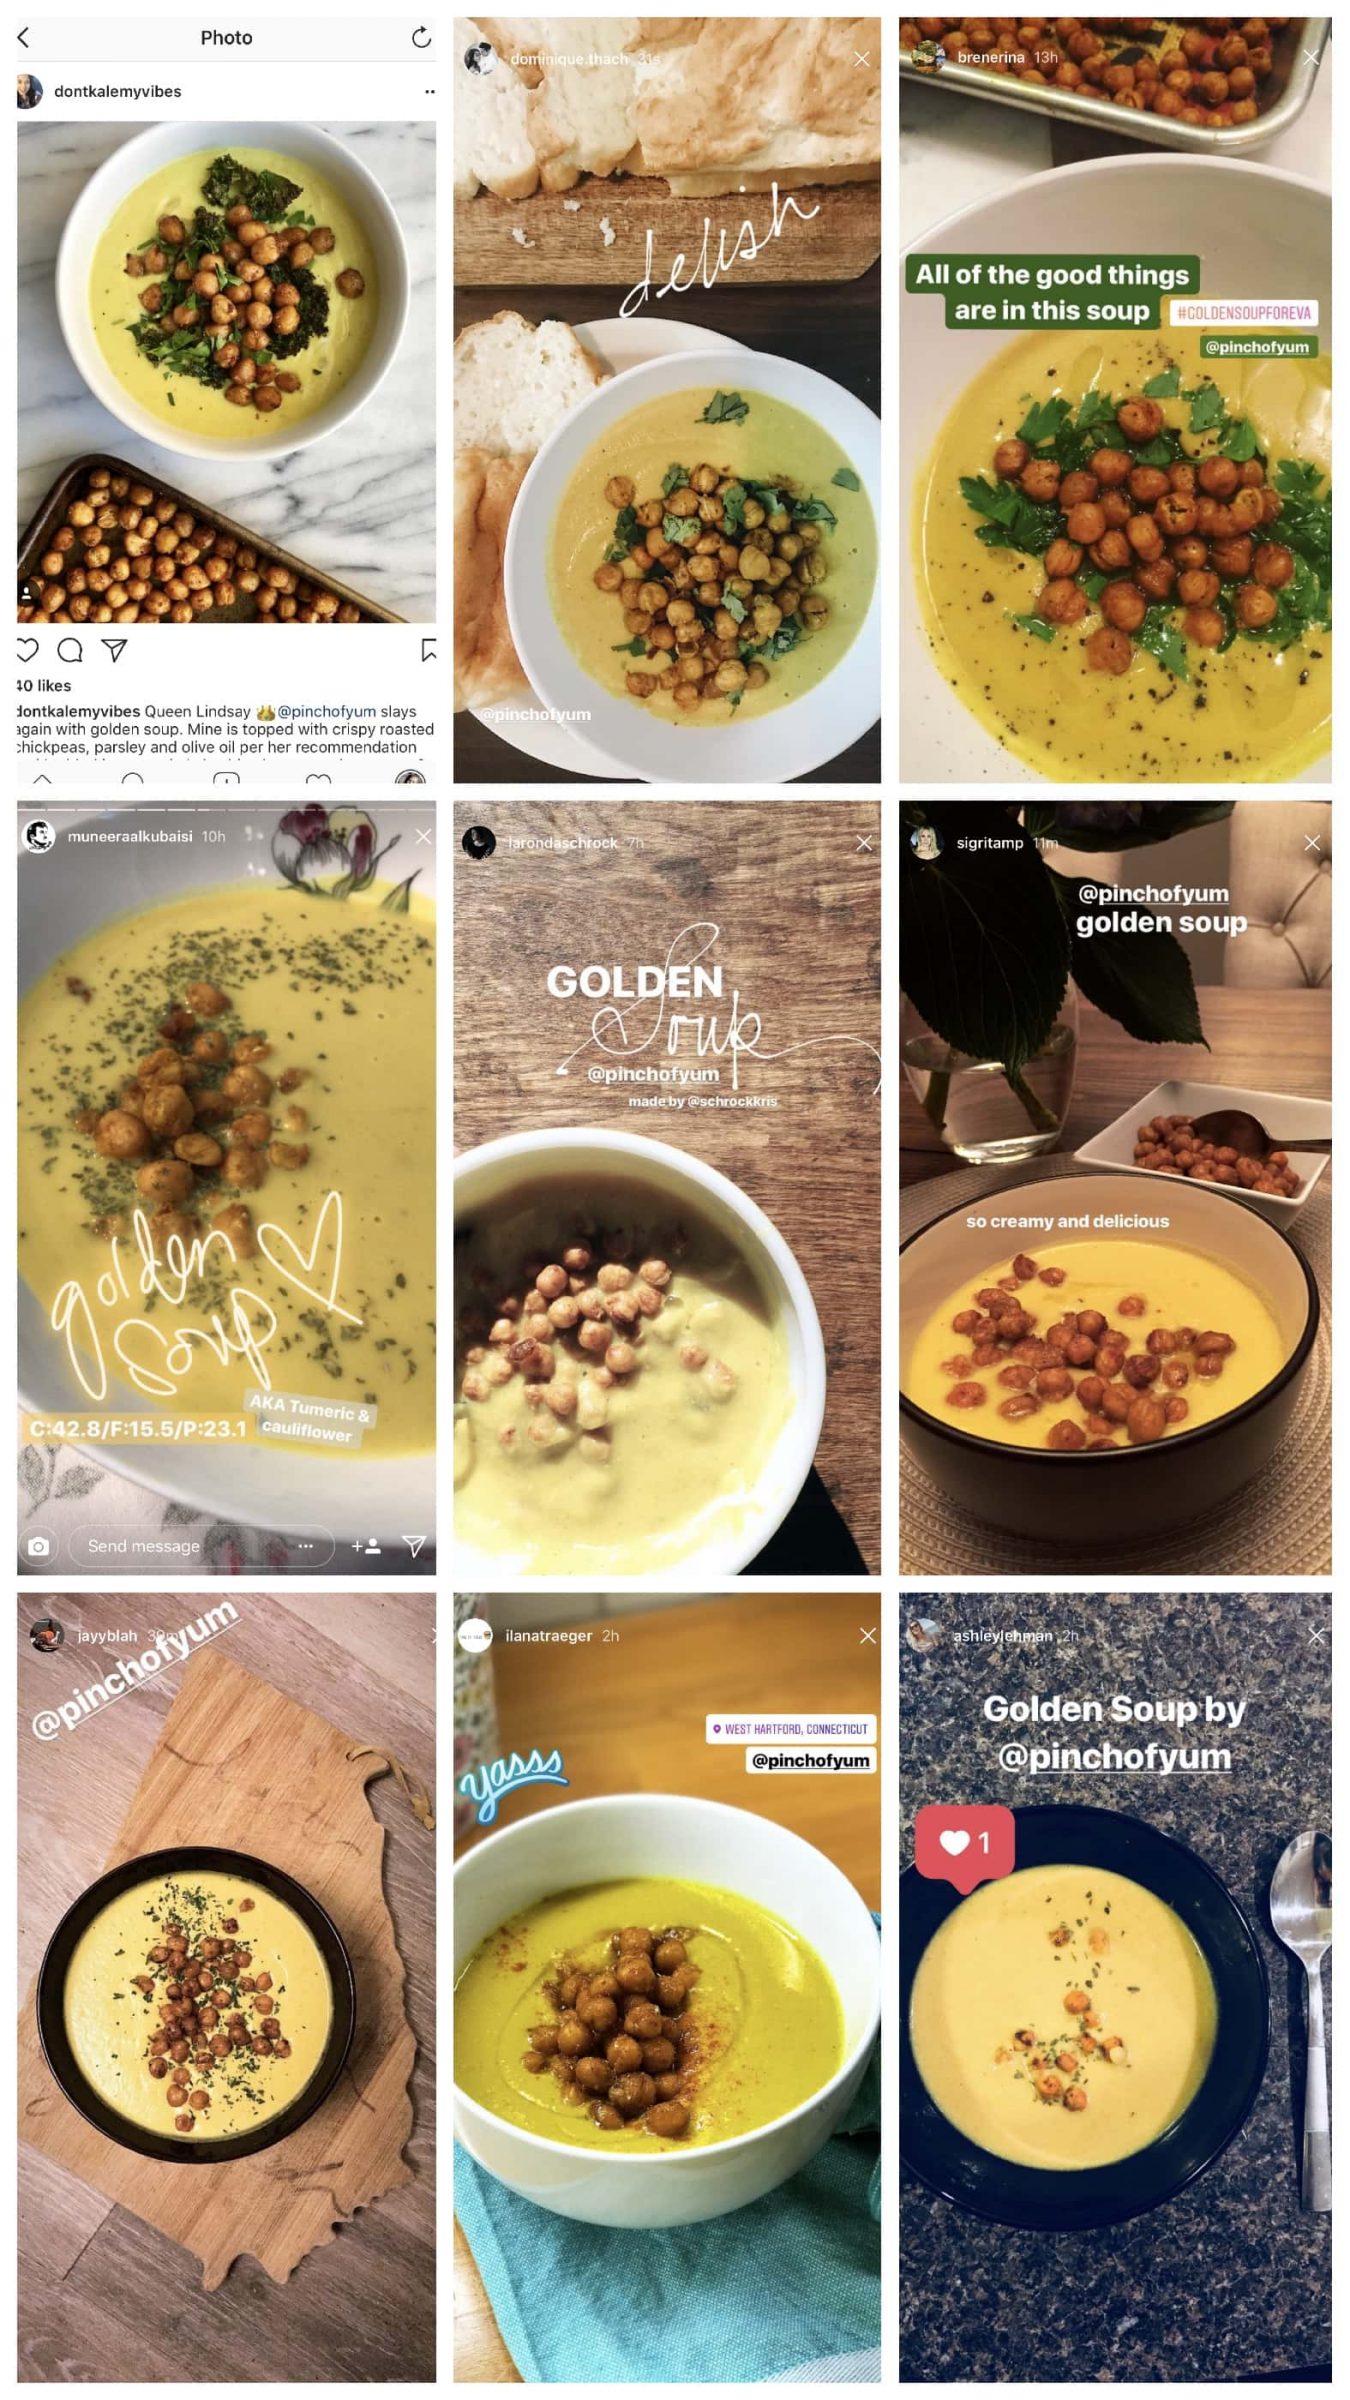 Different bowls of golden soup with roasted chickpeas.